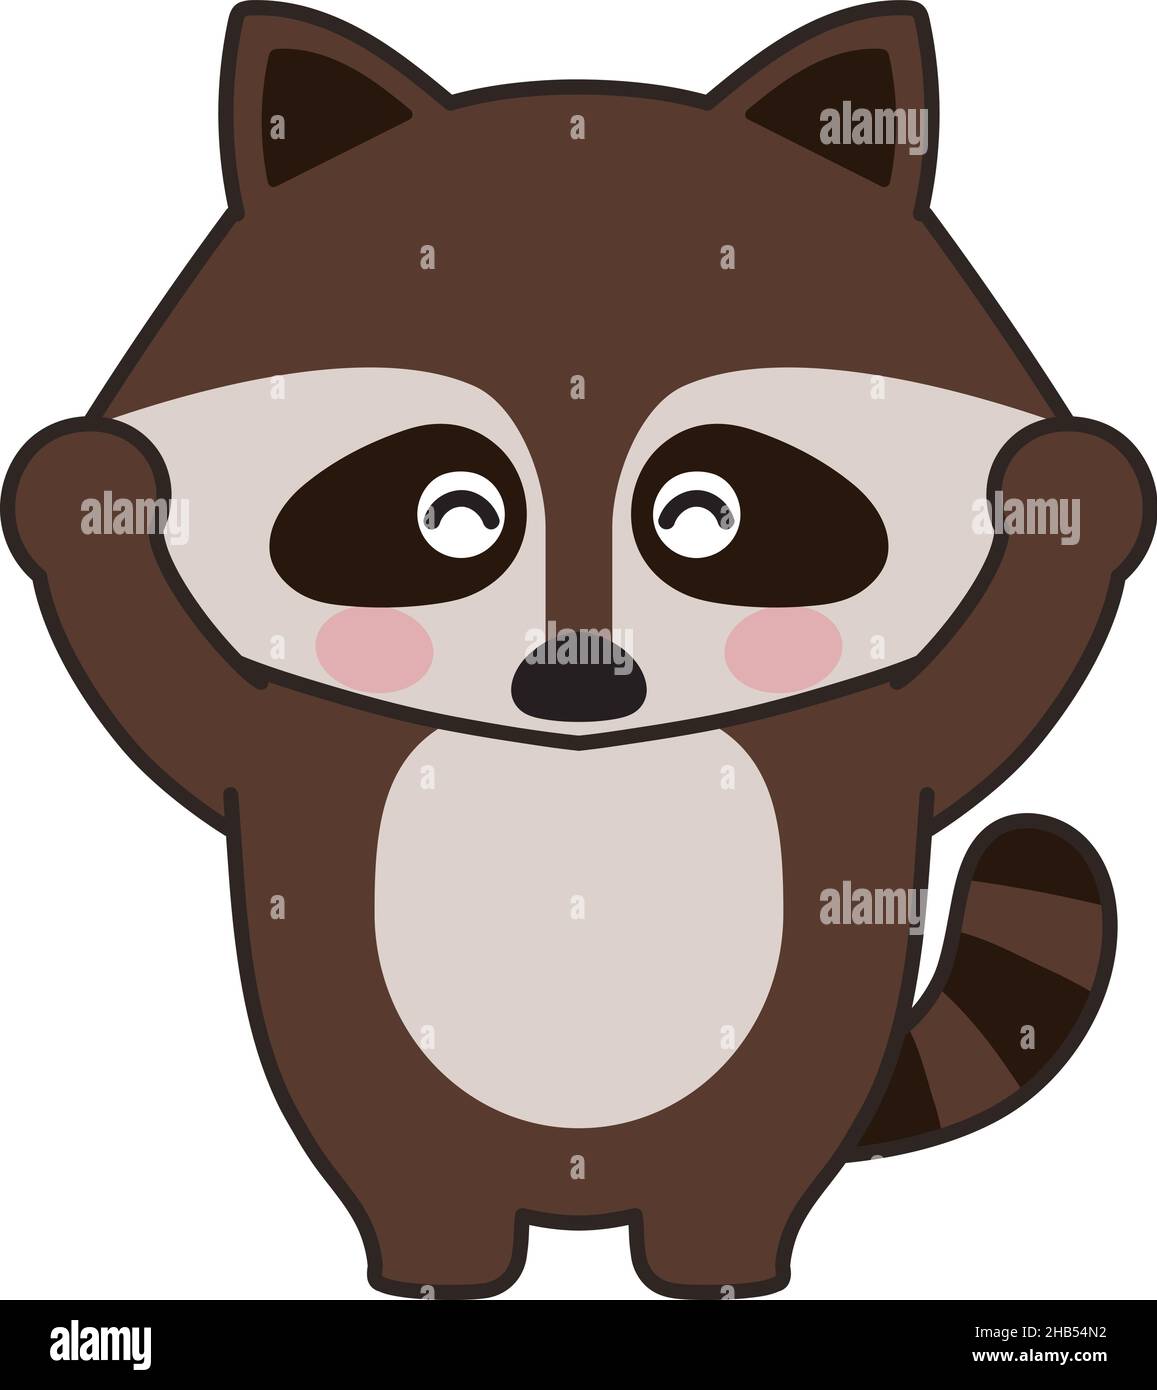 Raccoon feels great joy. Vector illustration isolated on a white background. Stock Vector